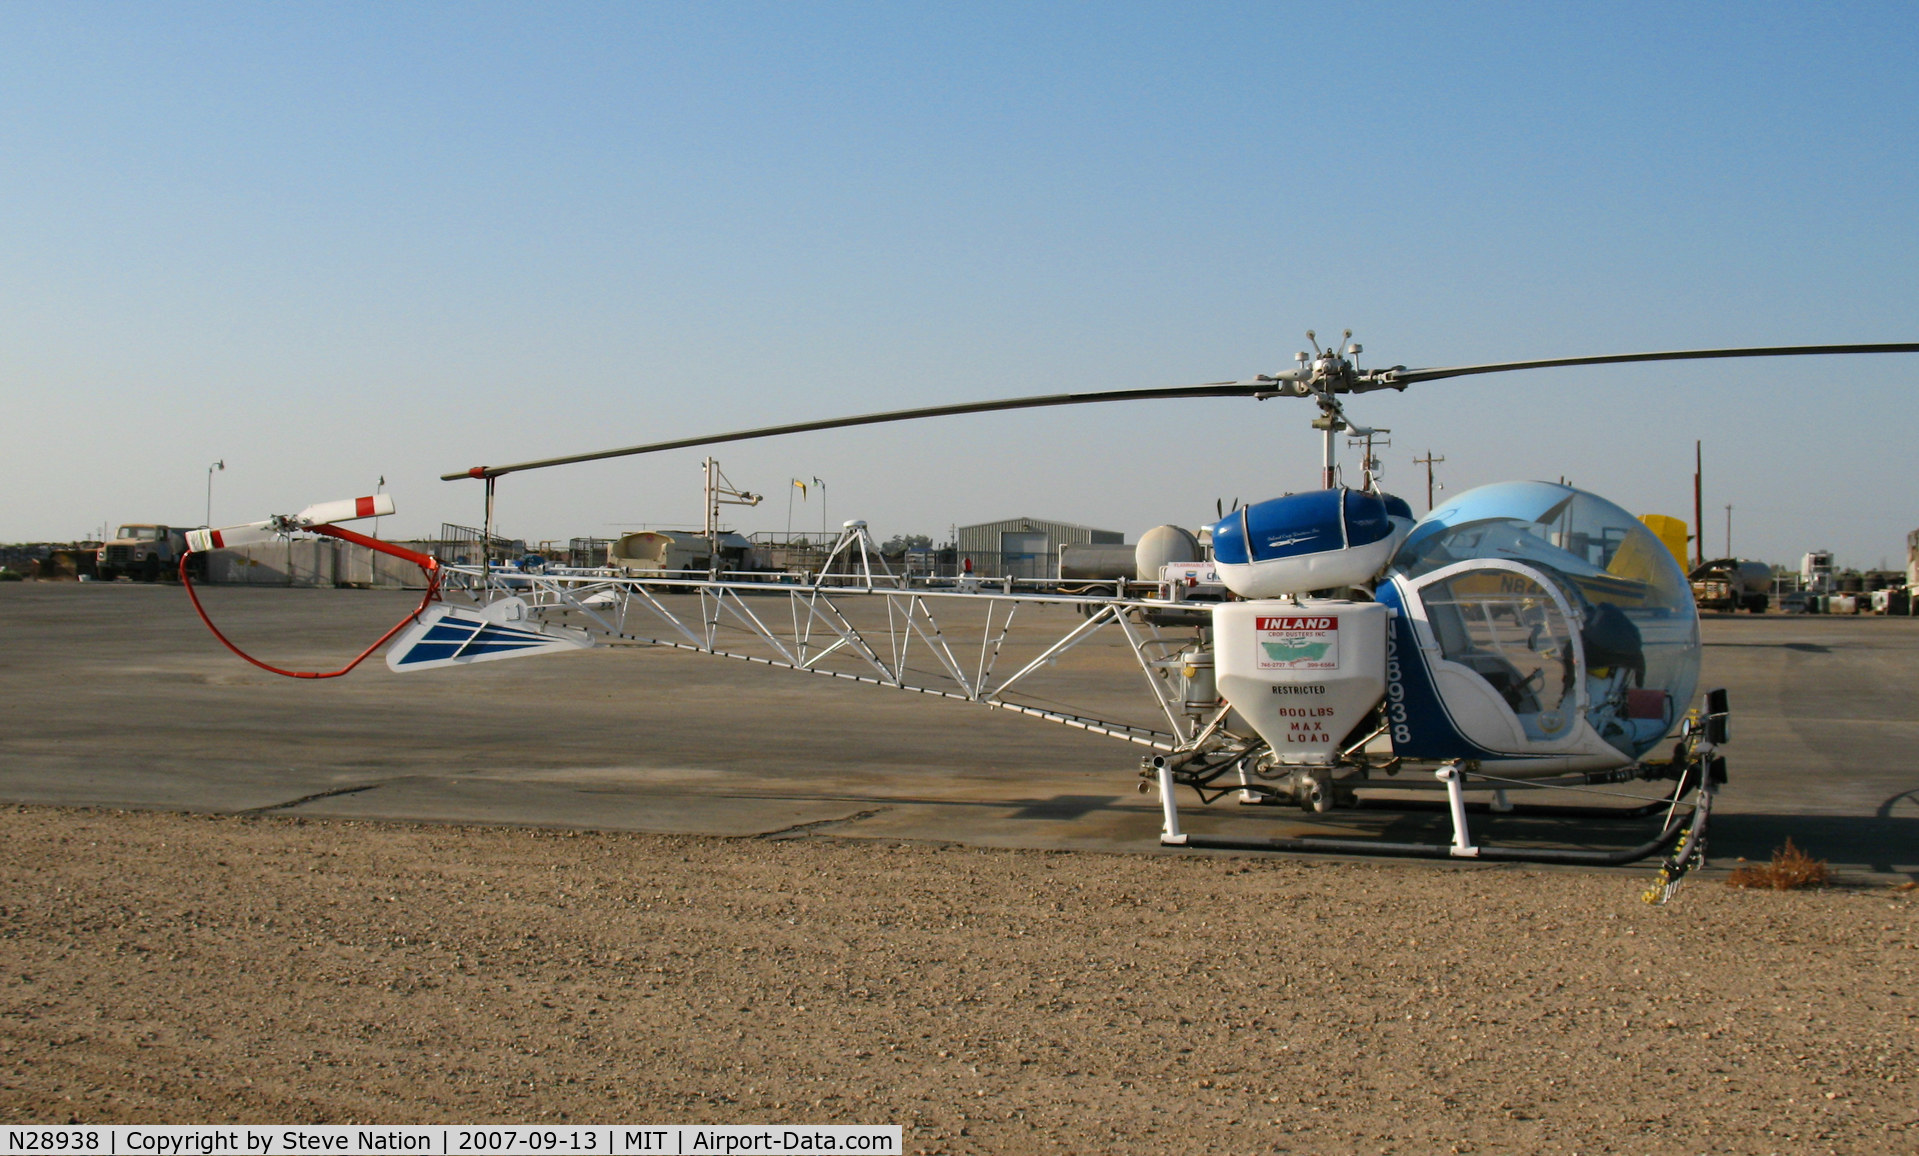 N28938, 1970 Bell 47G-4A C/N 7728, Inland Crop Dusters 1970 Bell 47G-4A as sprayer and in non-standard colors @ Shafter, CA